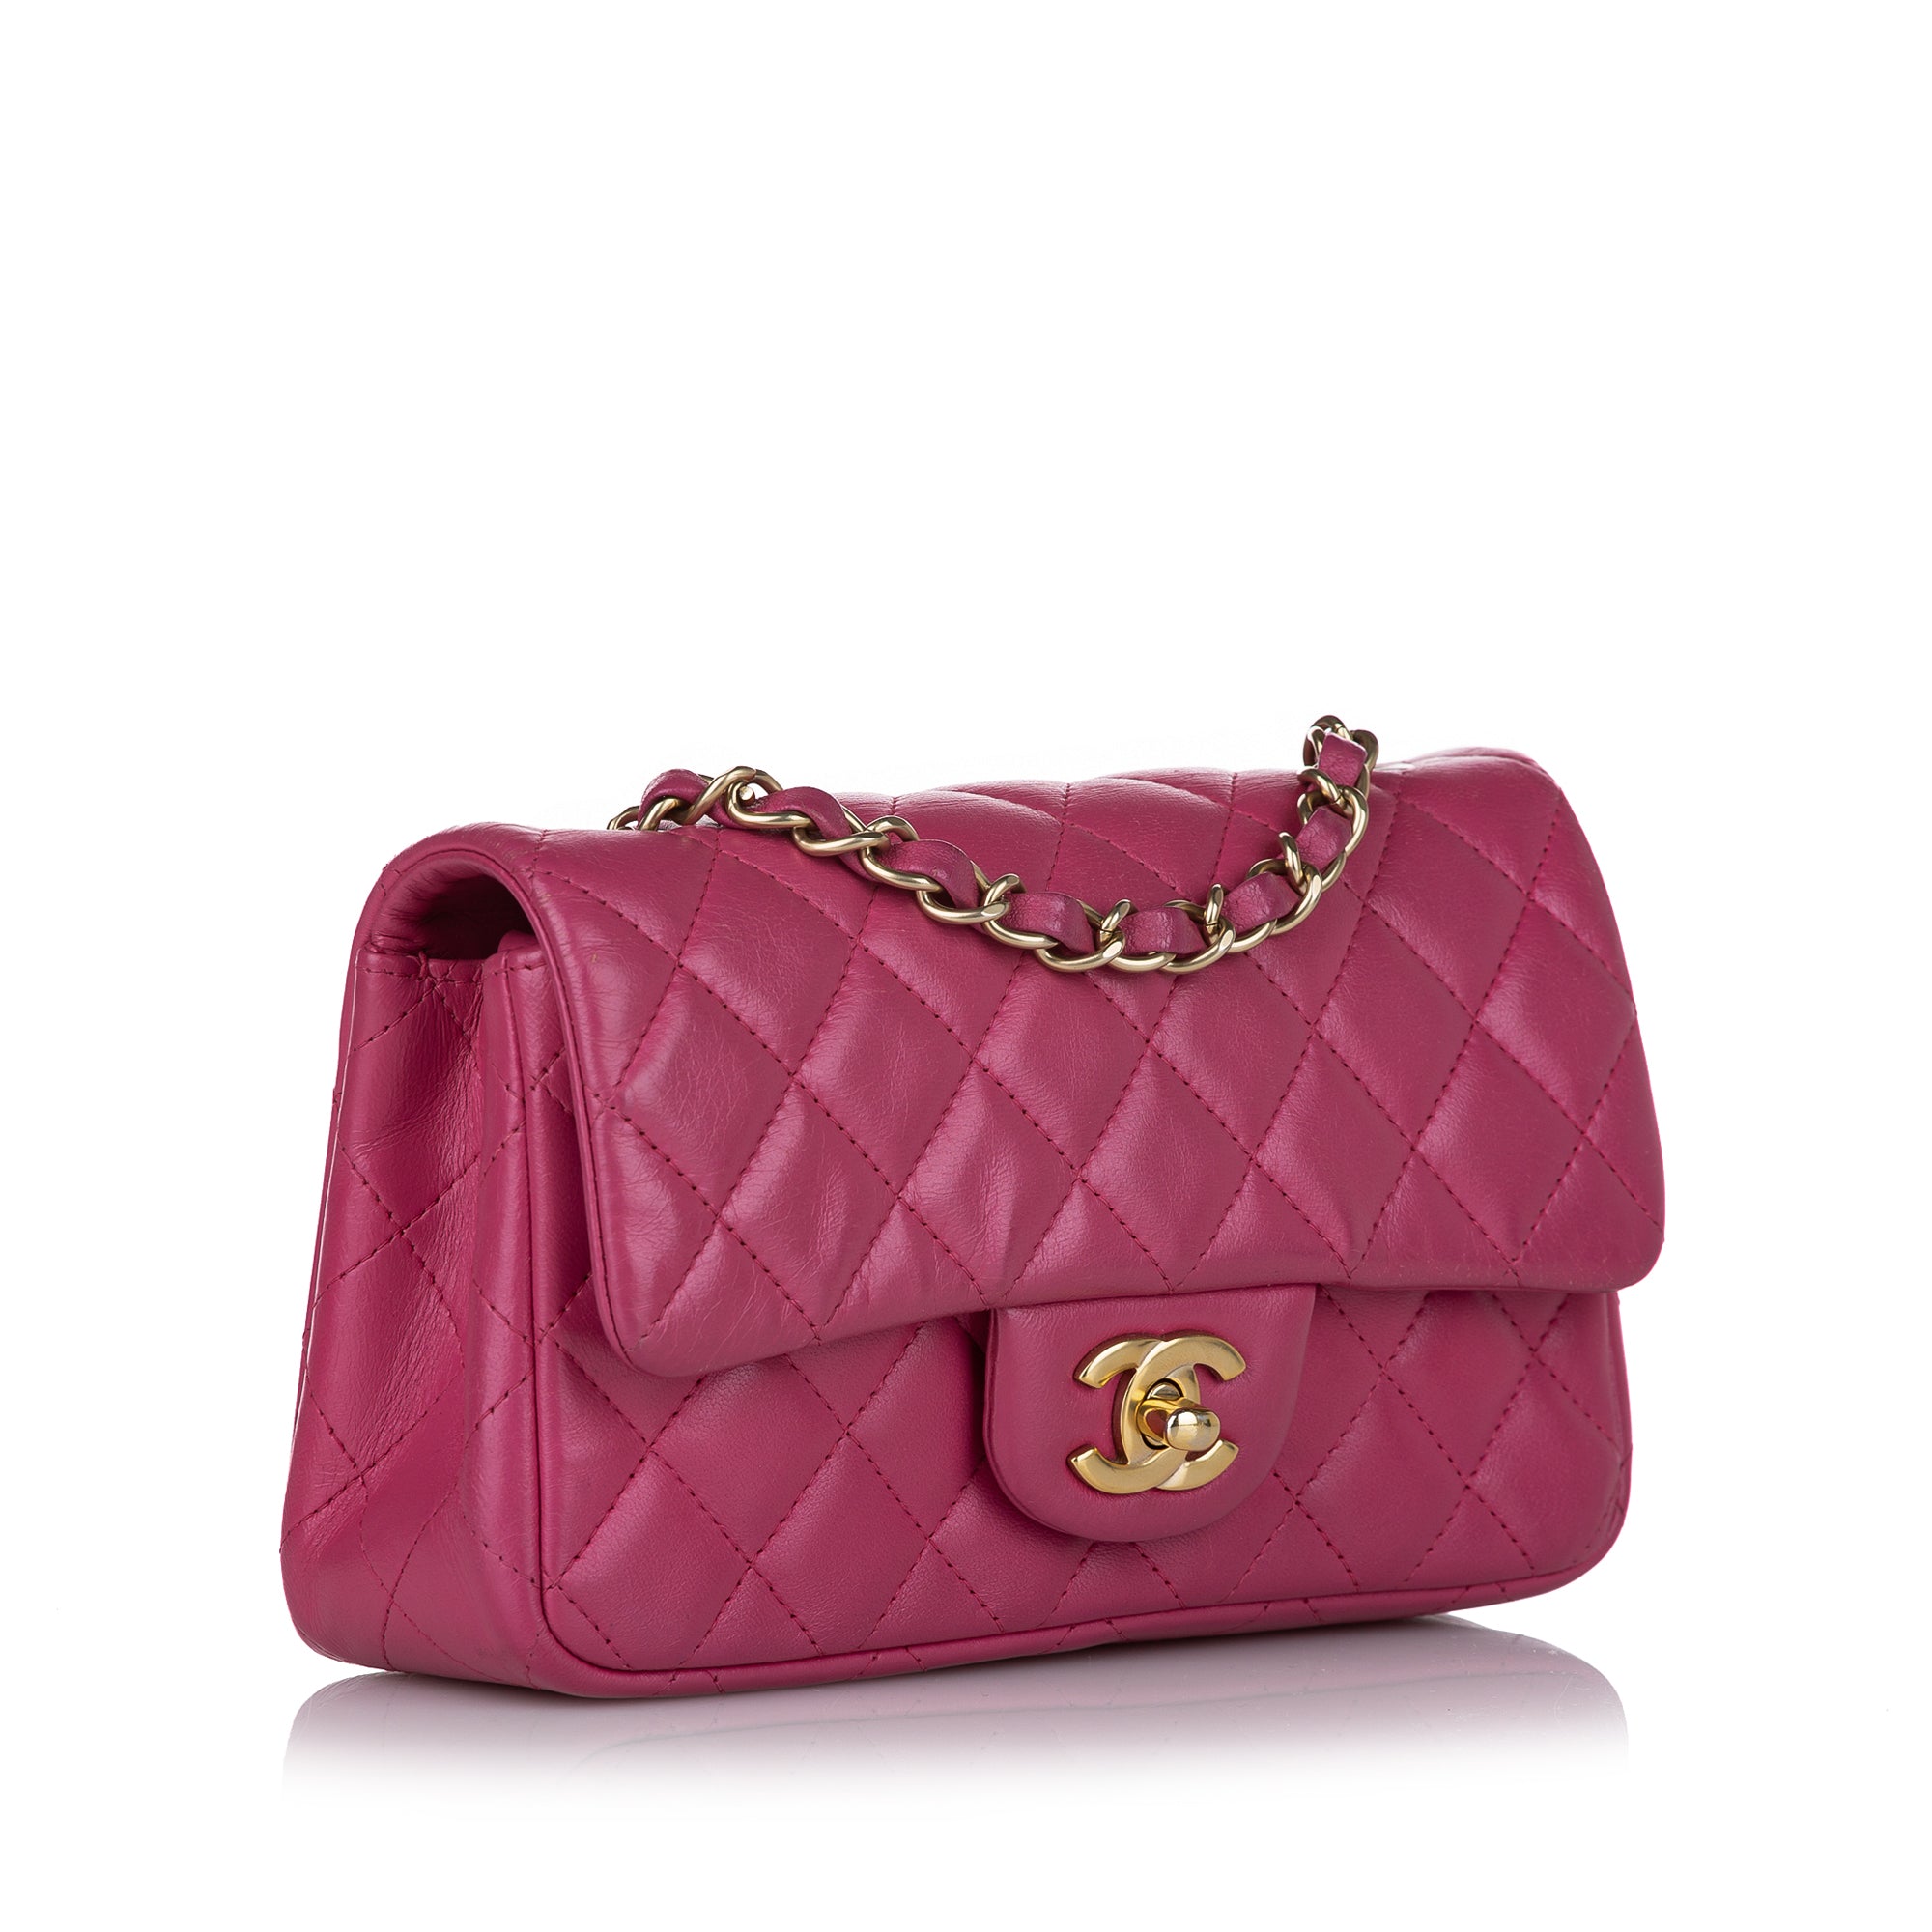 Chanel 22 Small Shoulder Bag Pink Quilted Leather – Celebrity Owned